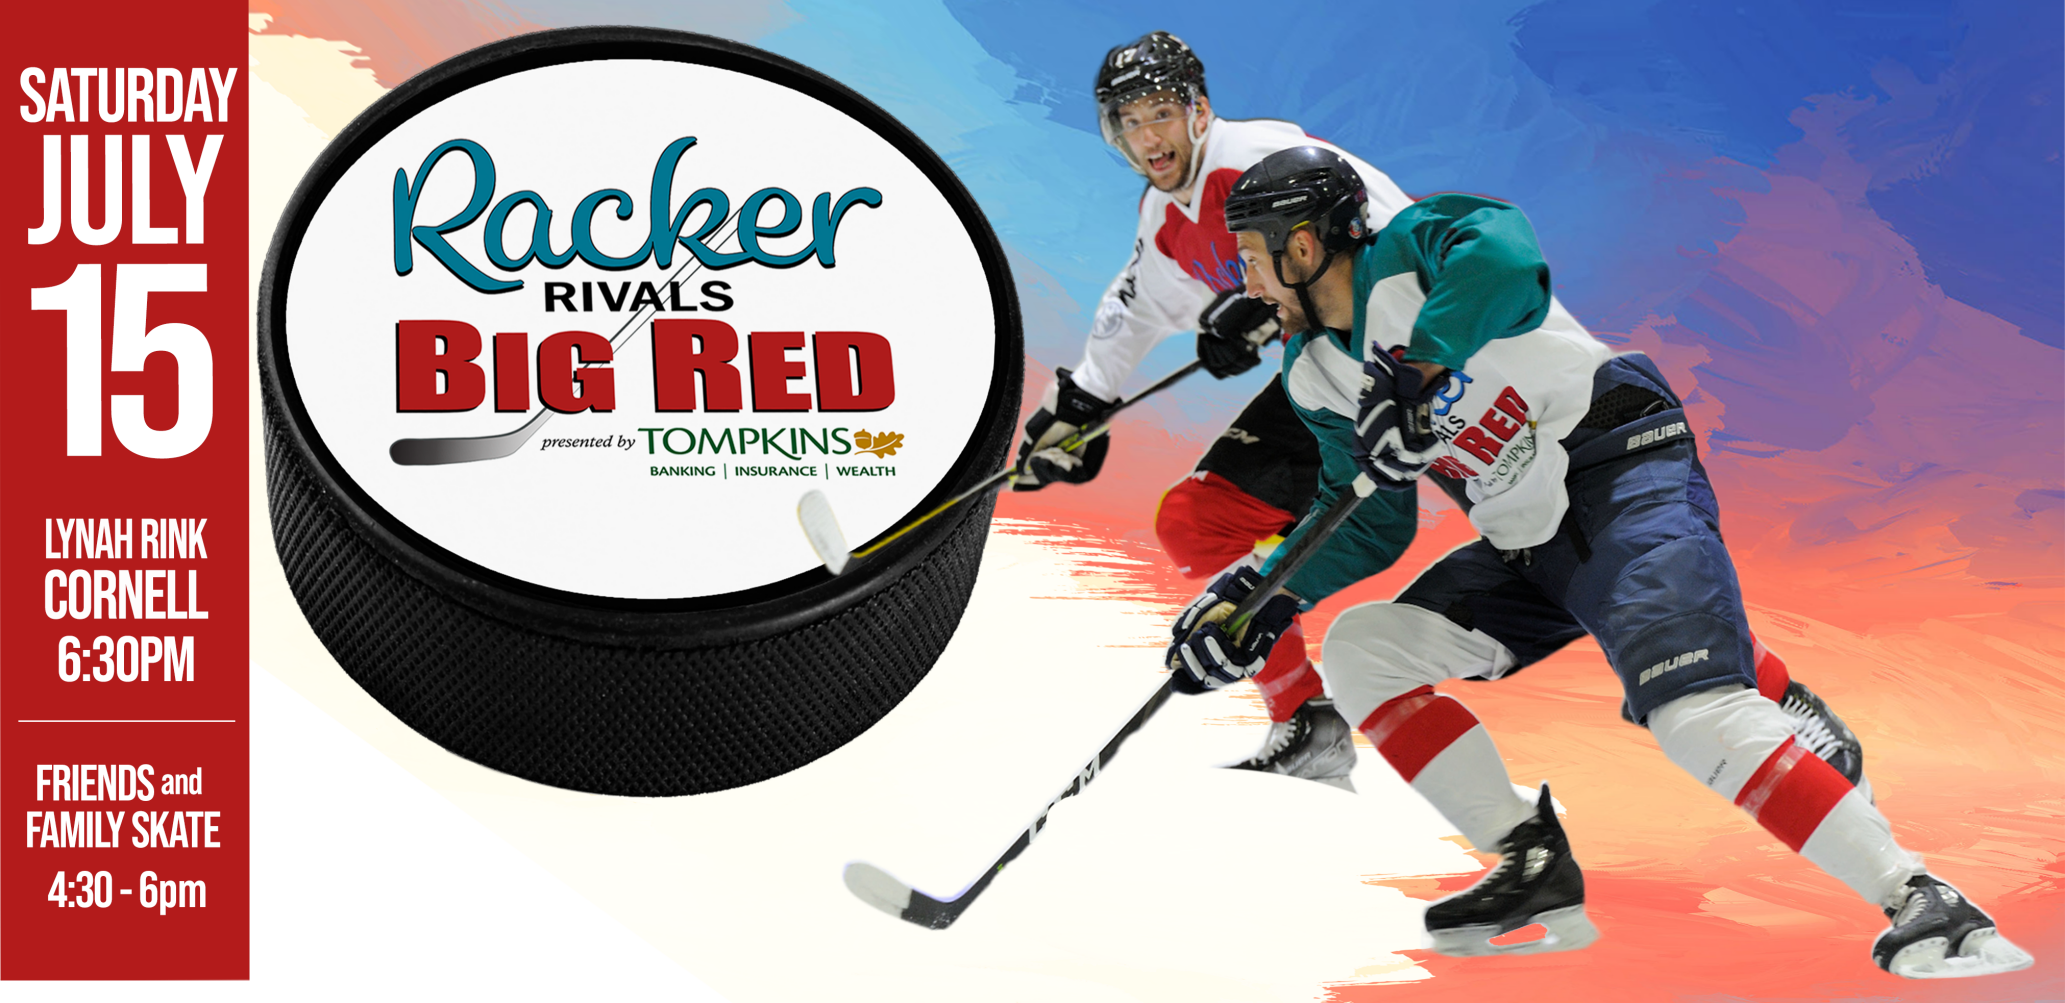 Lynah Rink to Host Racker Rivals Big Red on Saturday, July 15th Ithaca ithaca